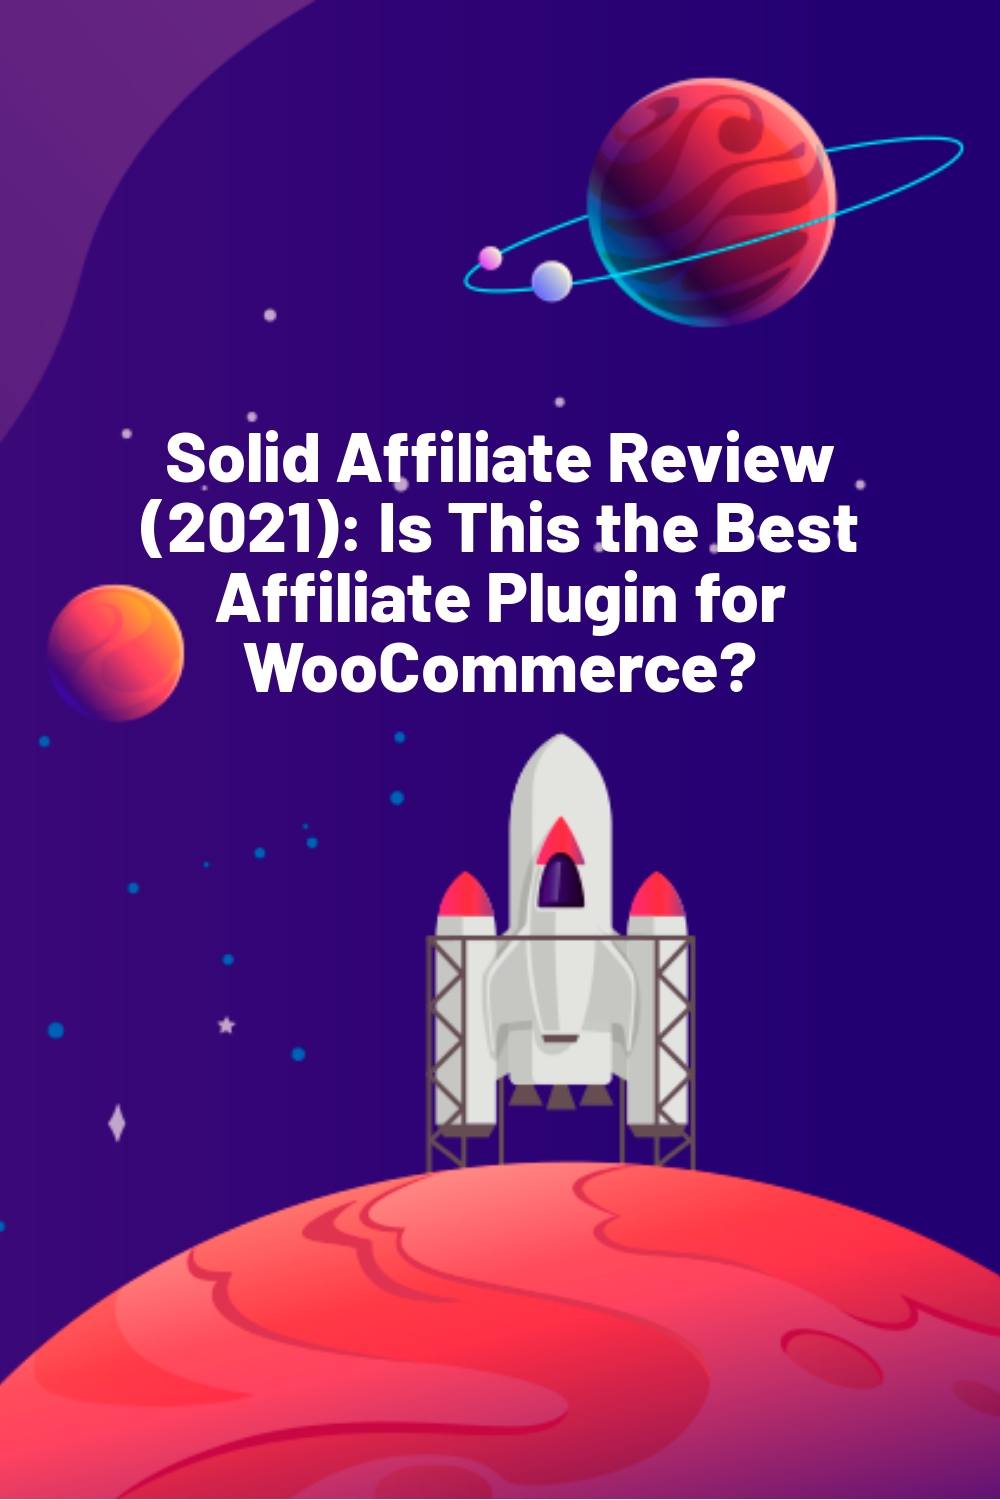 Solid Affiliate Review (2021): Is This the Best Affiliate Plugin for WooCommerce?